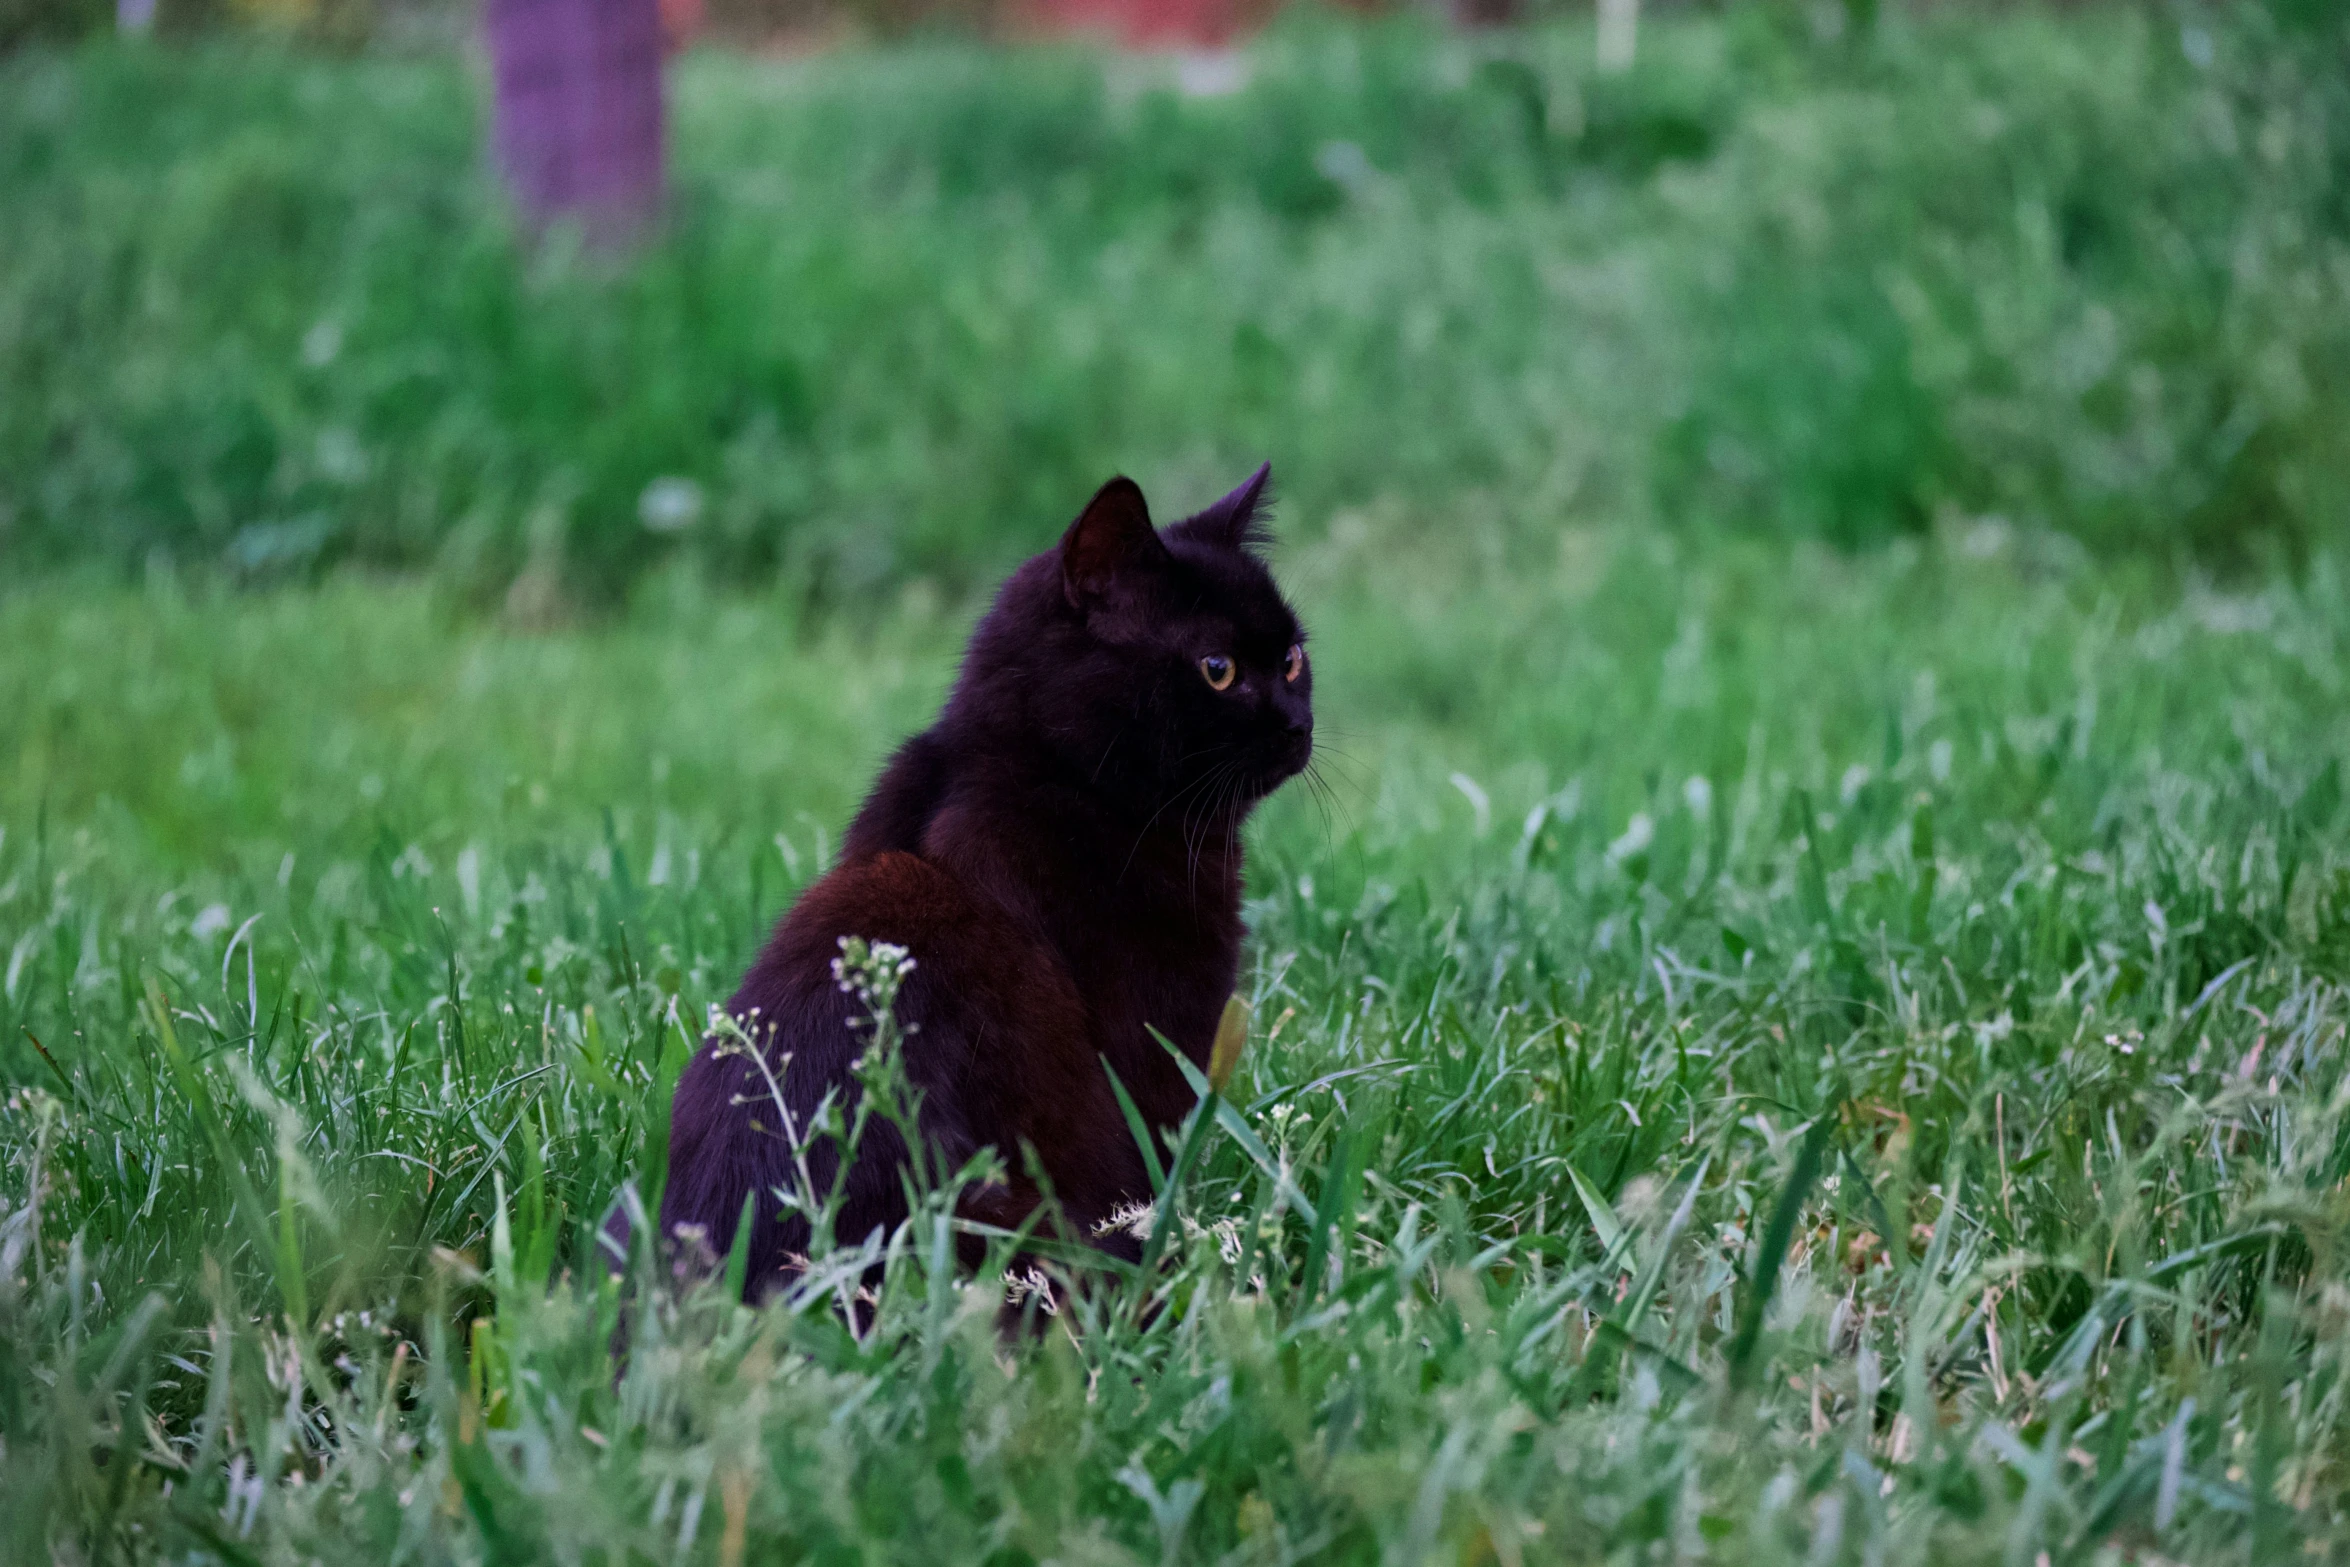 a black cat sitting in the grass by itself